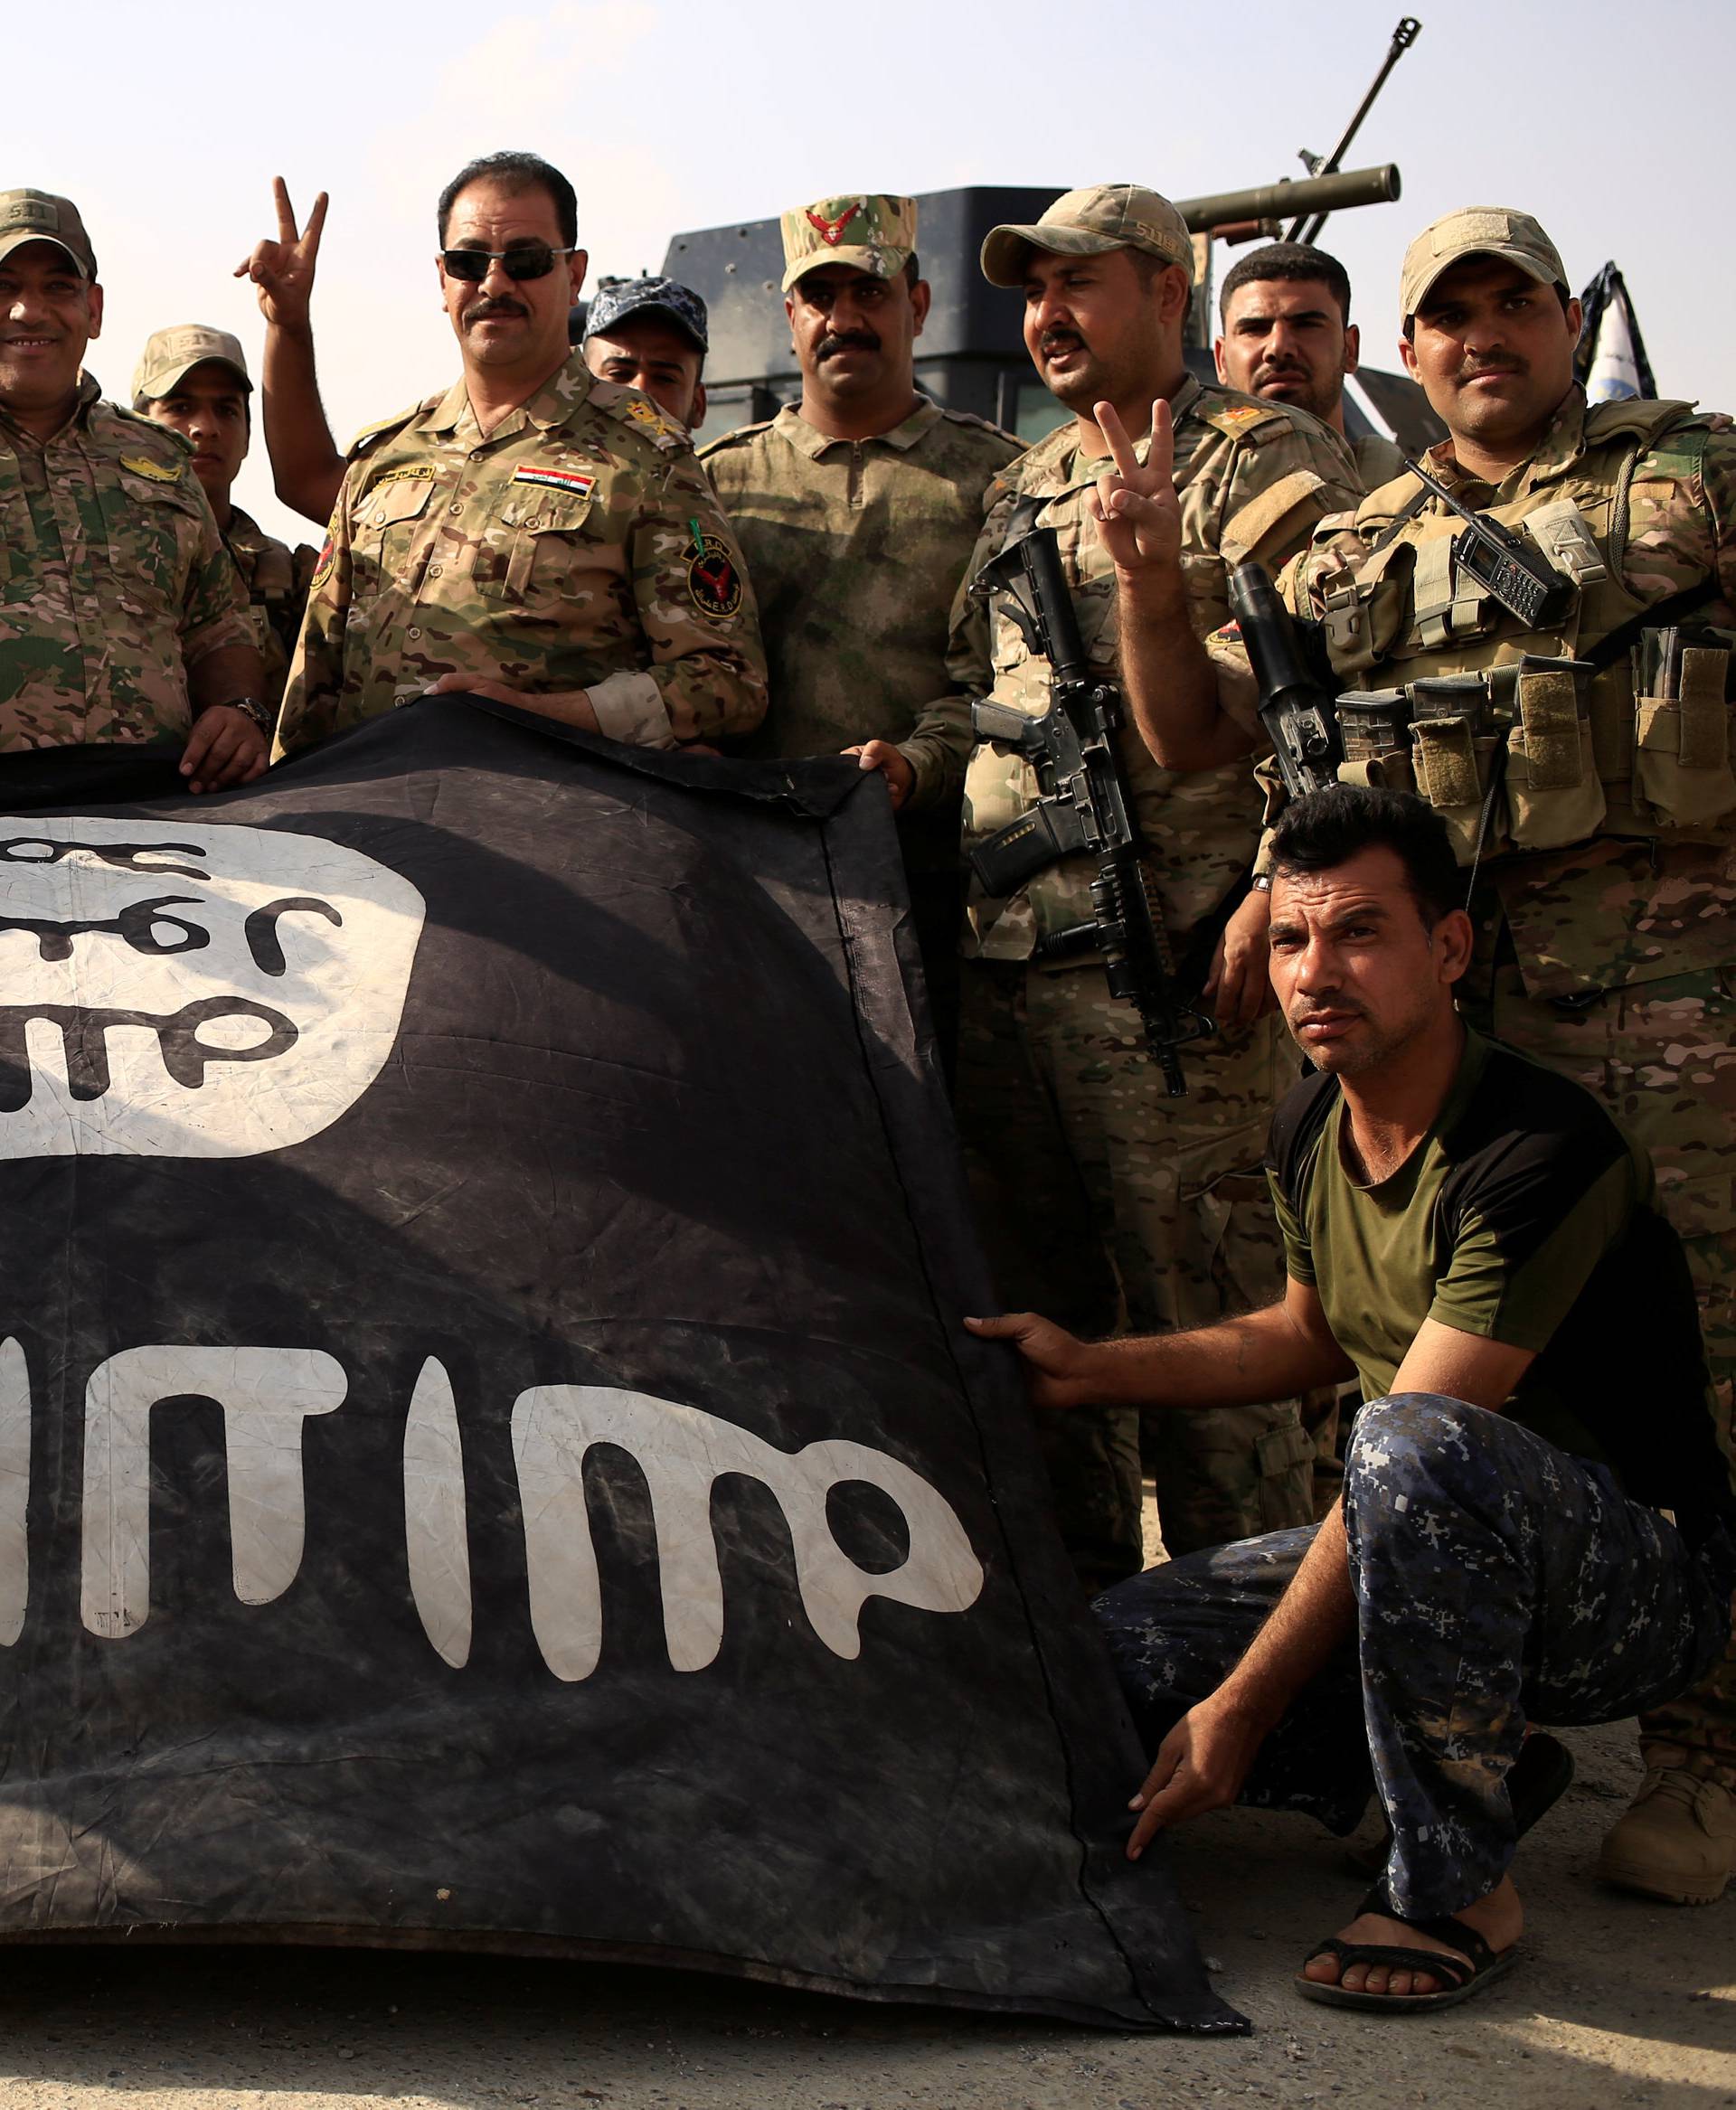 Iraqi soldiers celebrate as they pose with the Islamic State flag along a street of the town of al-Shura